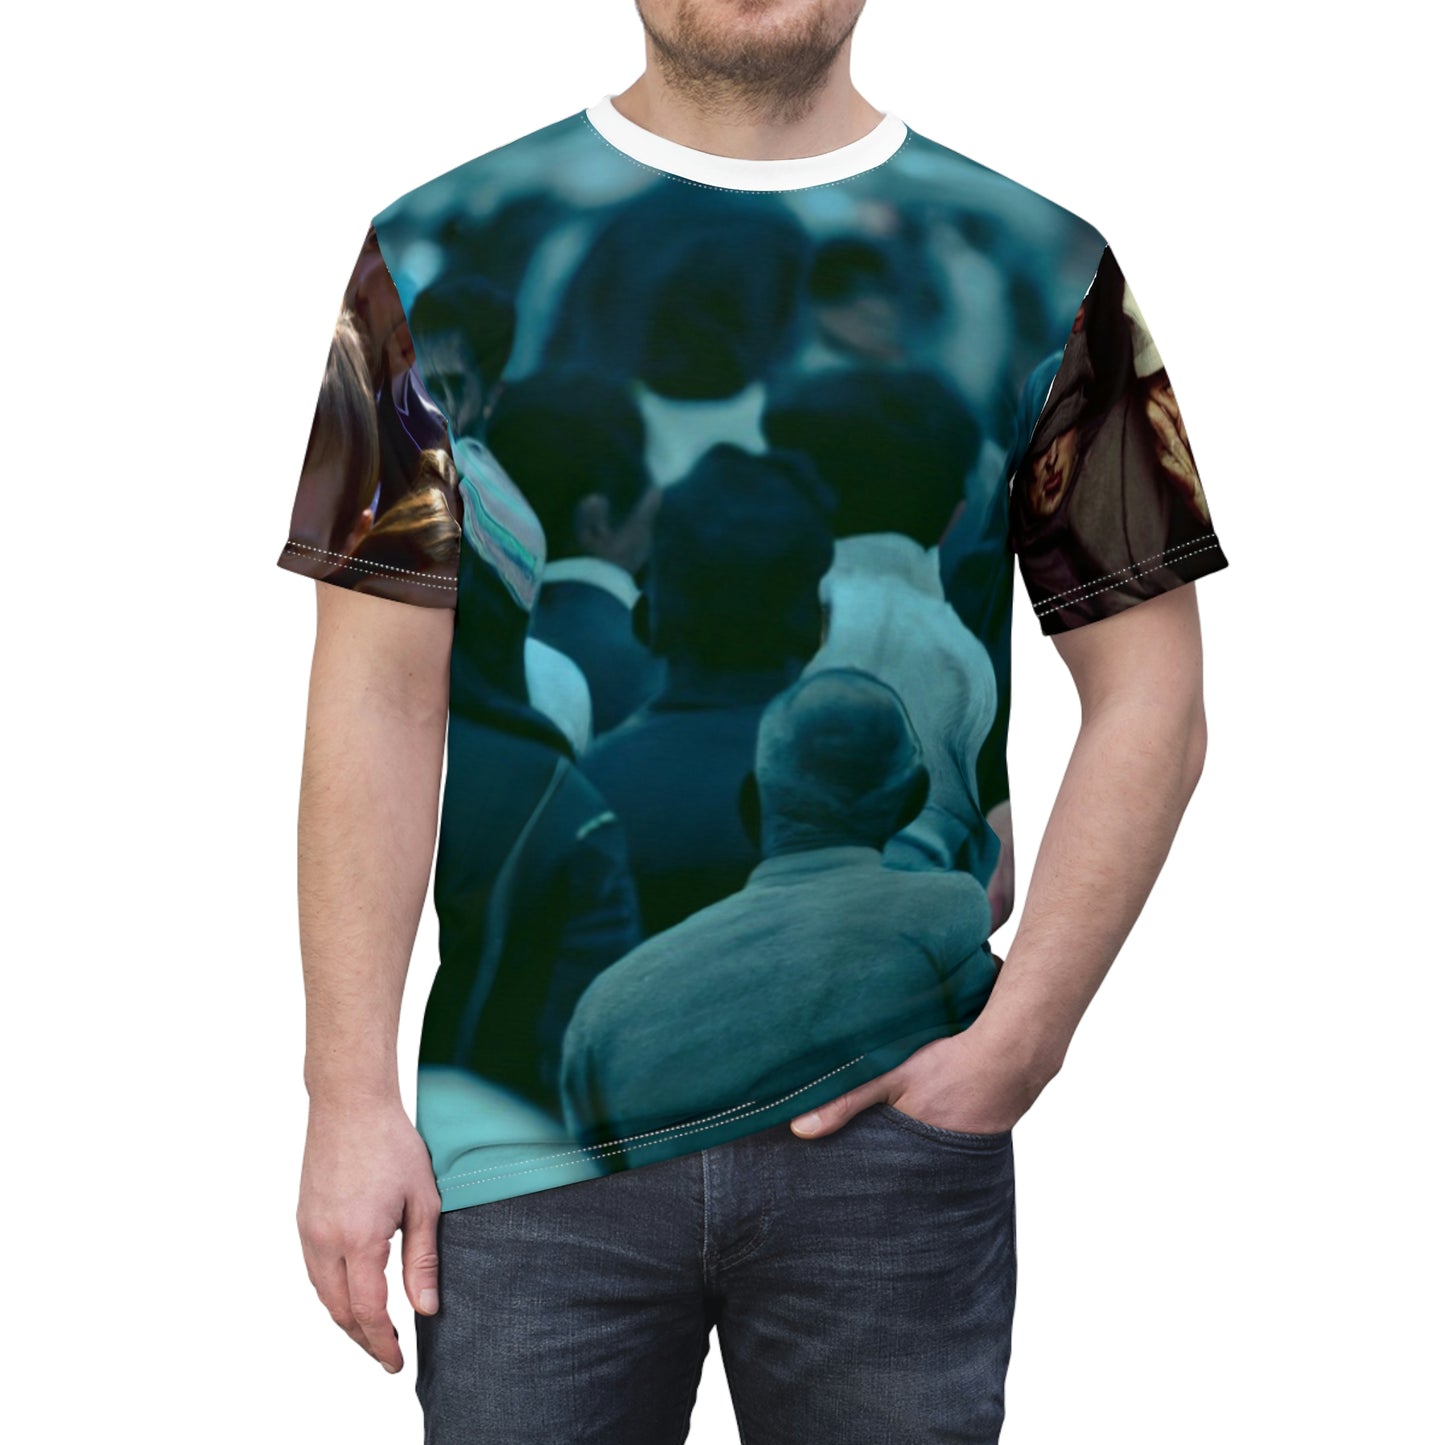 Anti Facial Recognition / AI invisibility Unisex AOP Cut & Sew Tee